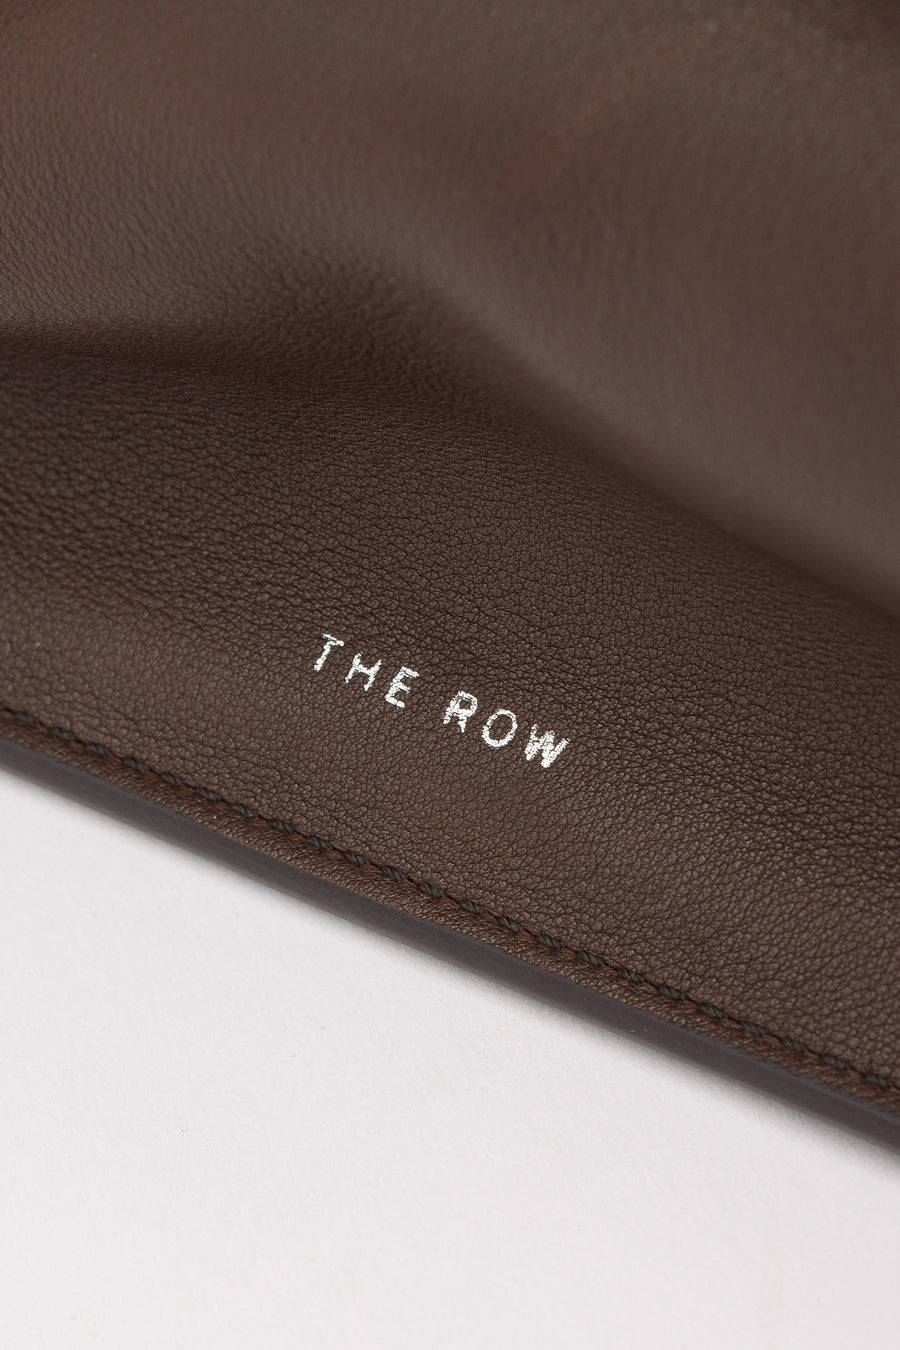 Soft Margaux 10 Bag Brown in Leather – The Row